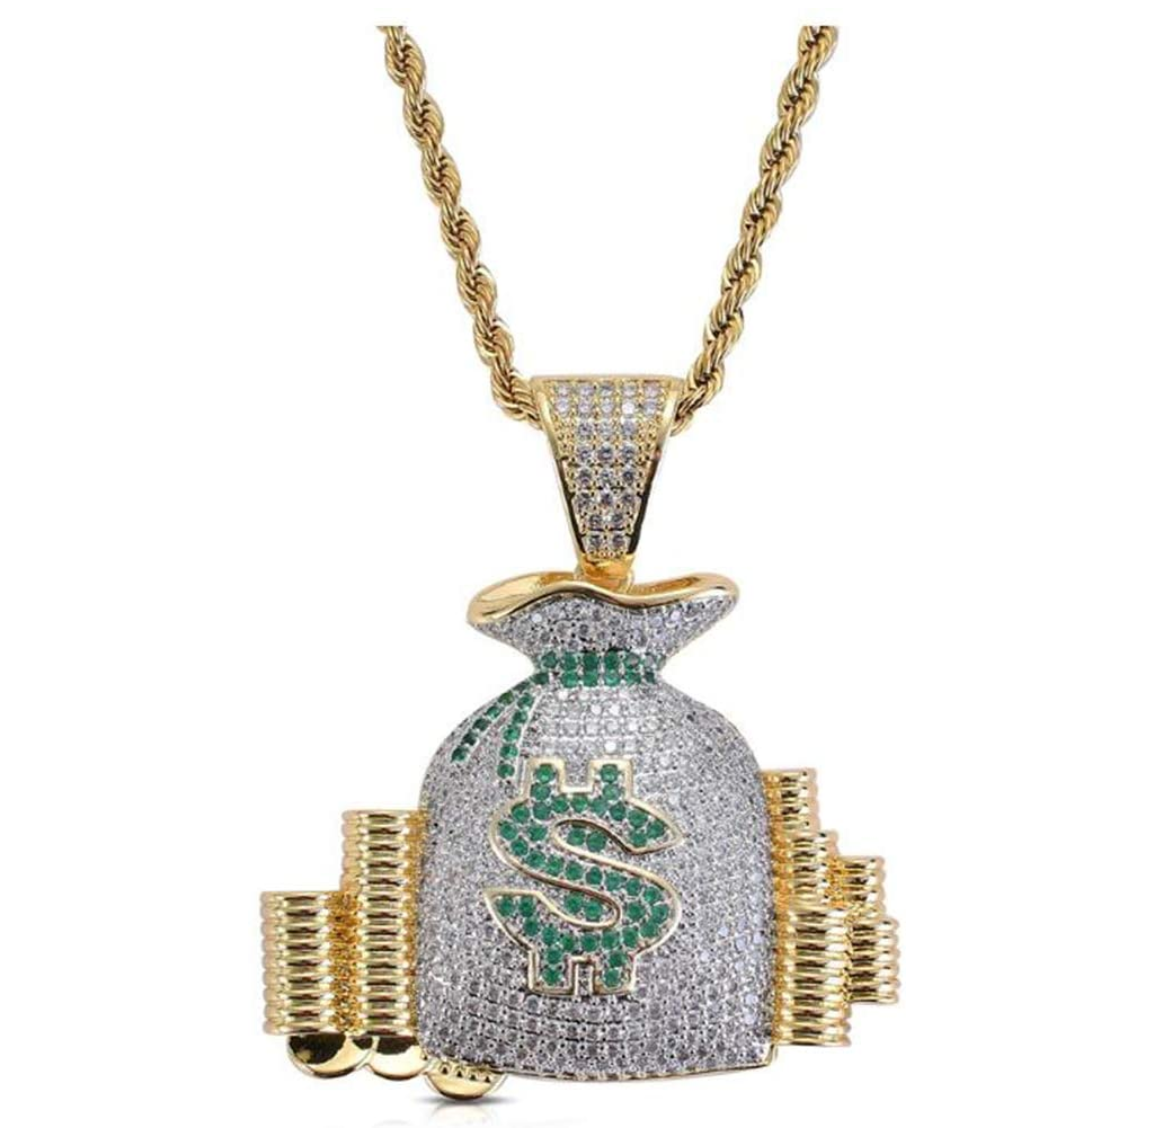 Money Bag Pendant Rapper Money Cash Necklace Cartoon Simulated Diamond Money Bag Chain Iced Out 24in.